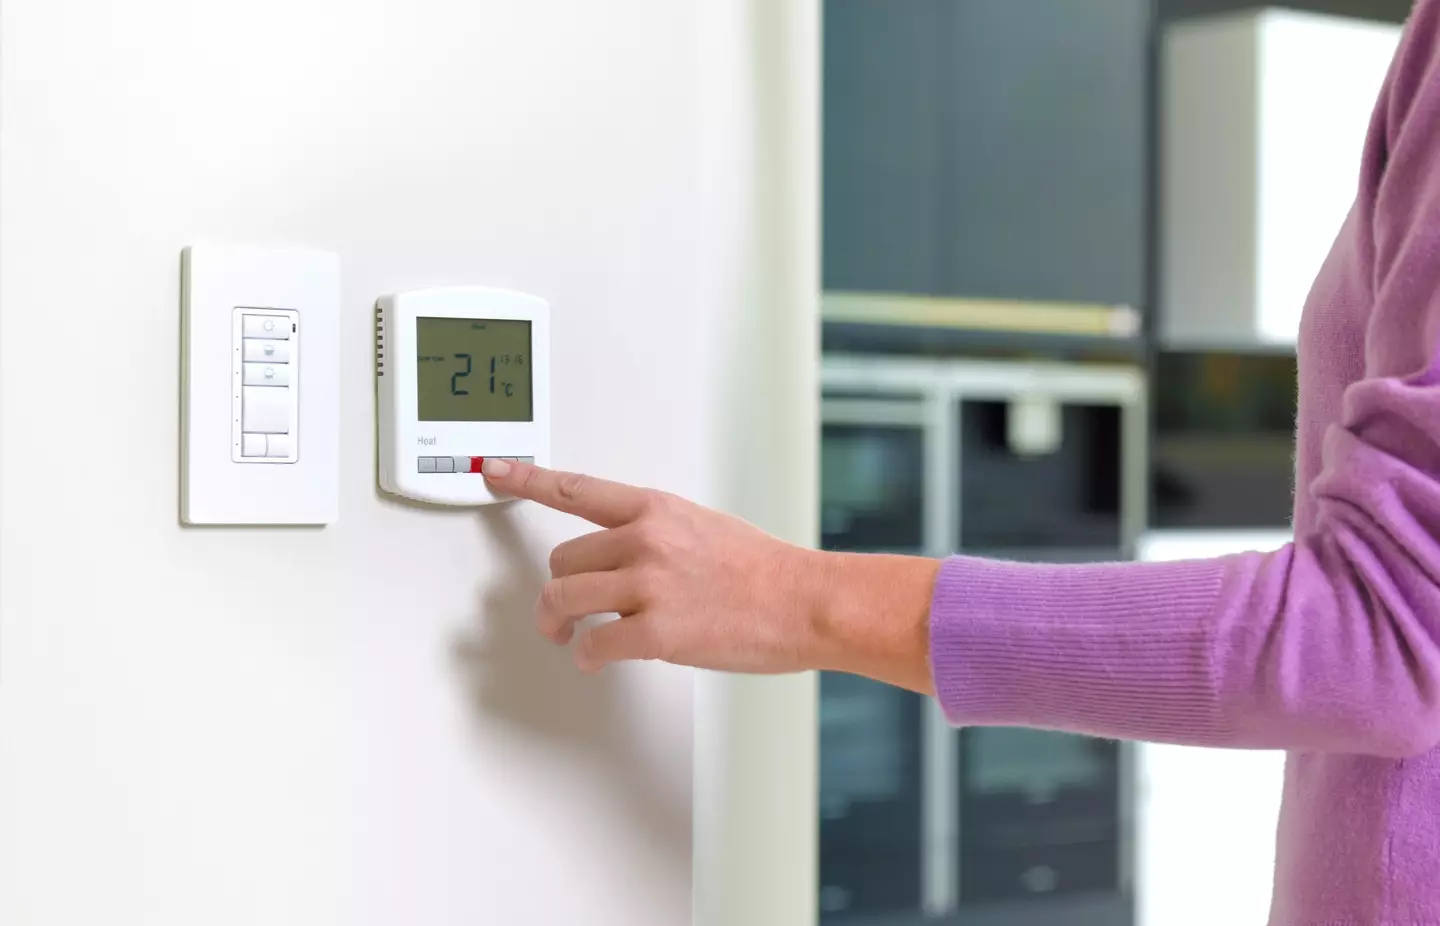 People's energy bills are expected to go up as the months get colder.